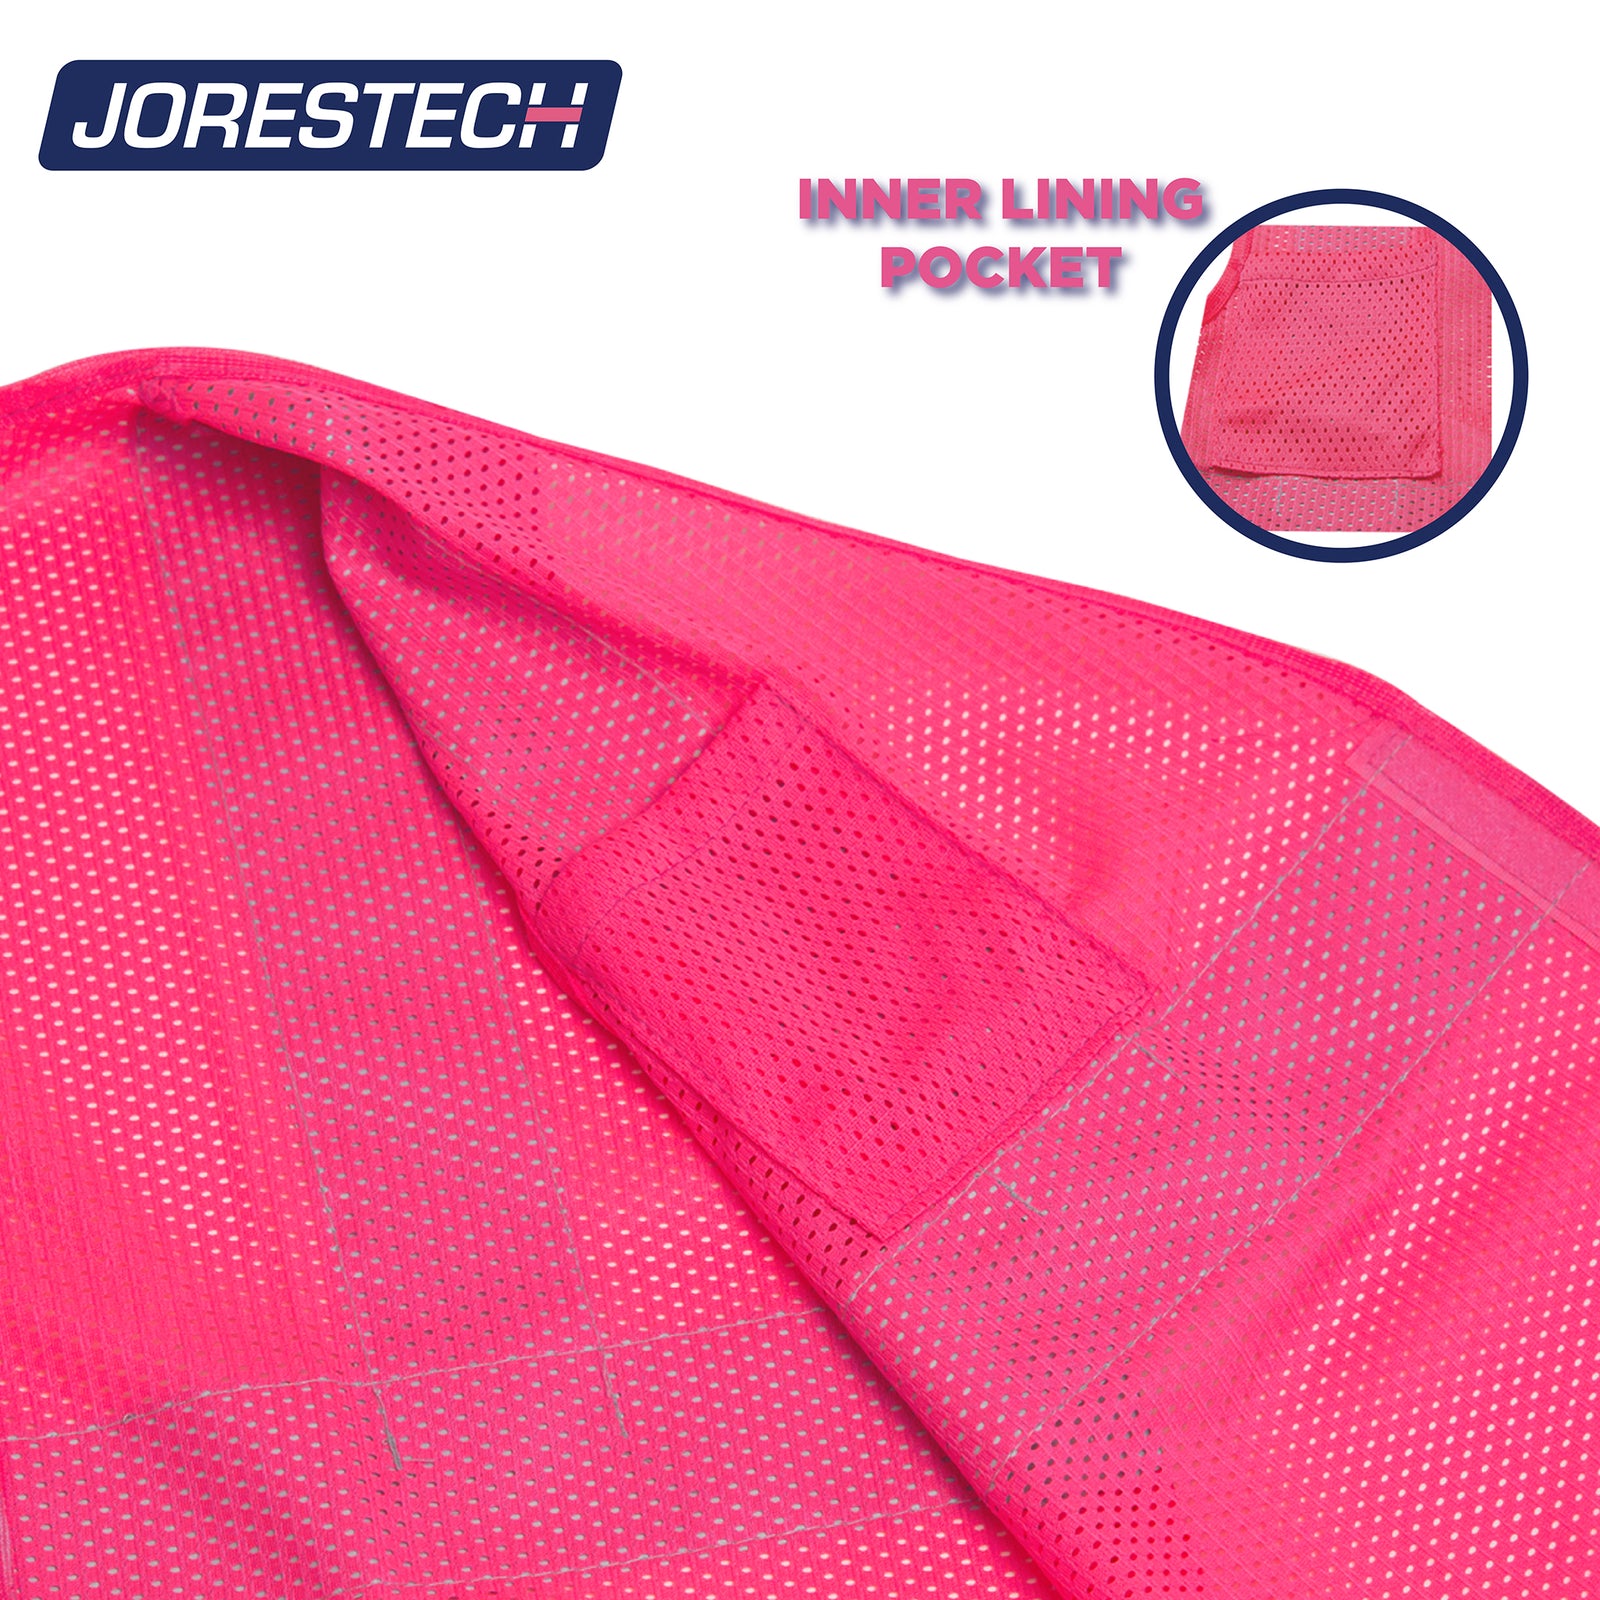 Shows the pink mesh hi vis safety vest with one pocket and hook and loop fastener